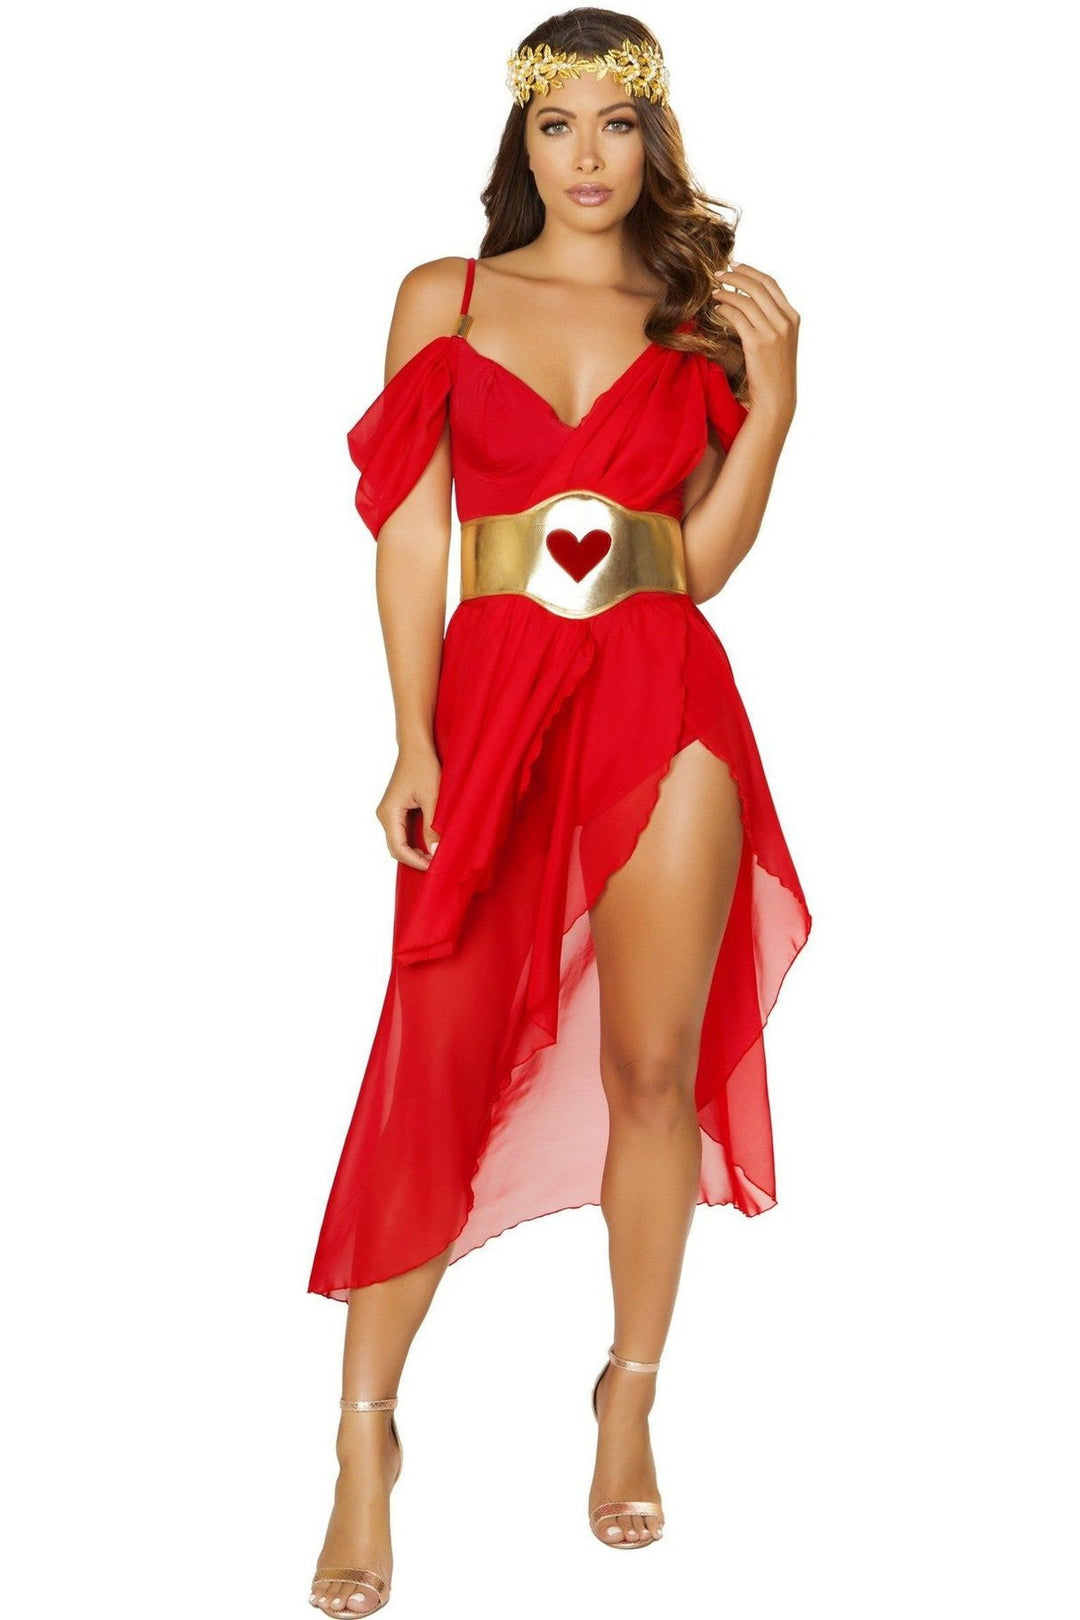 Roma Goddess of Love Costume-Goddess Costumes-Roma Costumes-Red-SEXYSHOES.COM